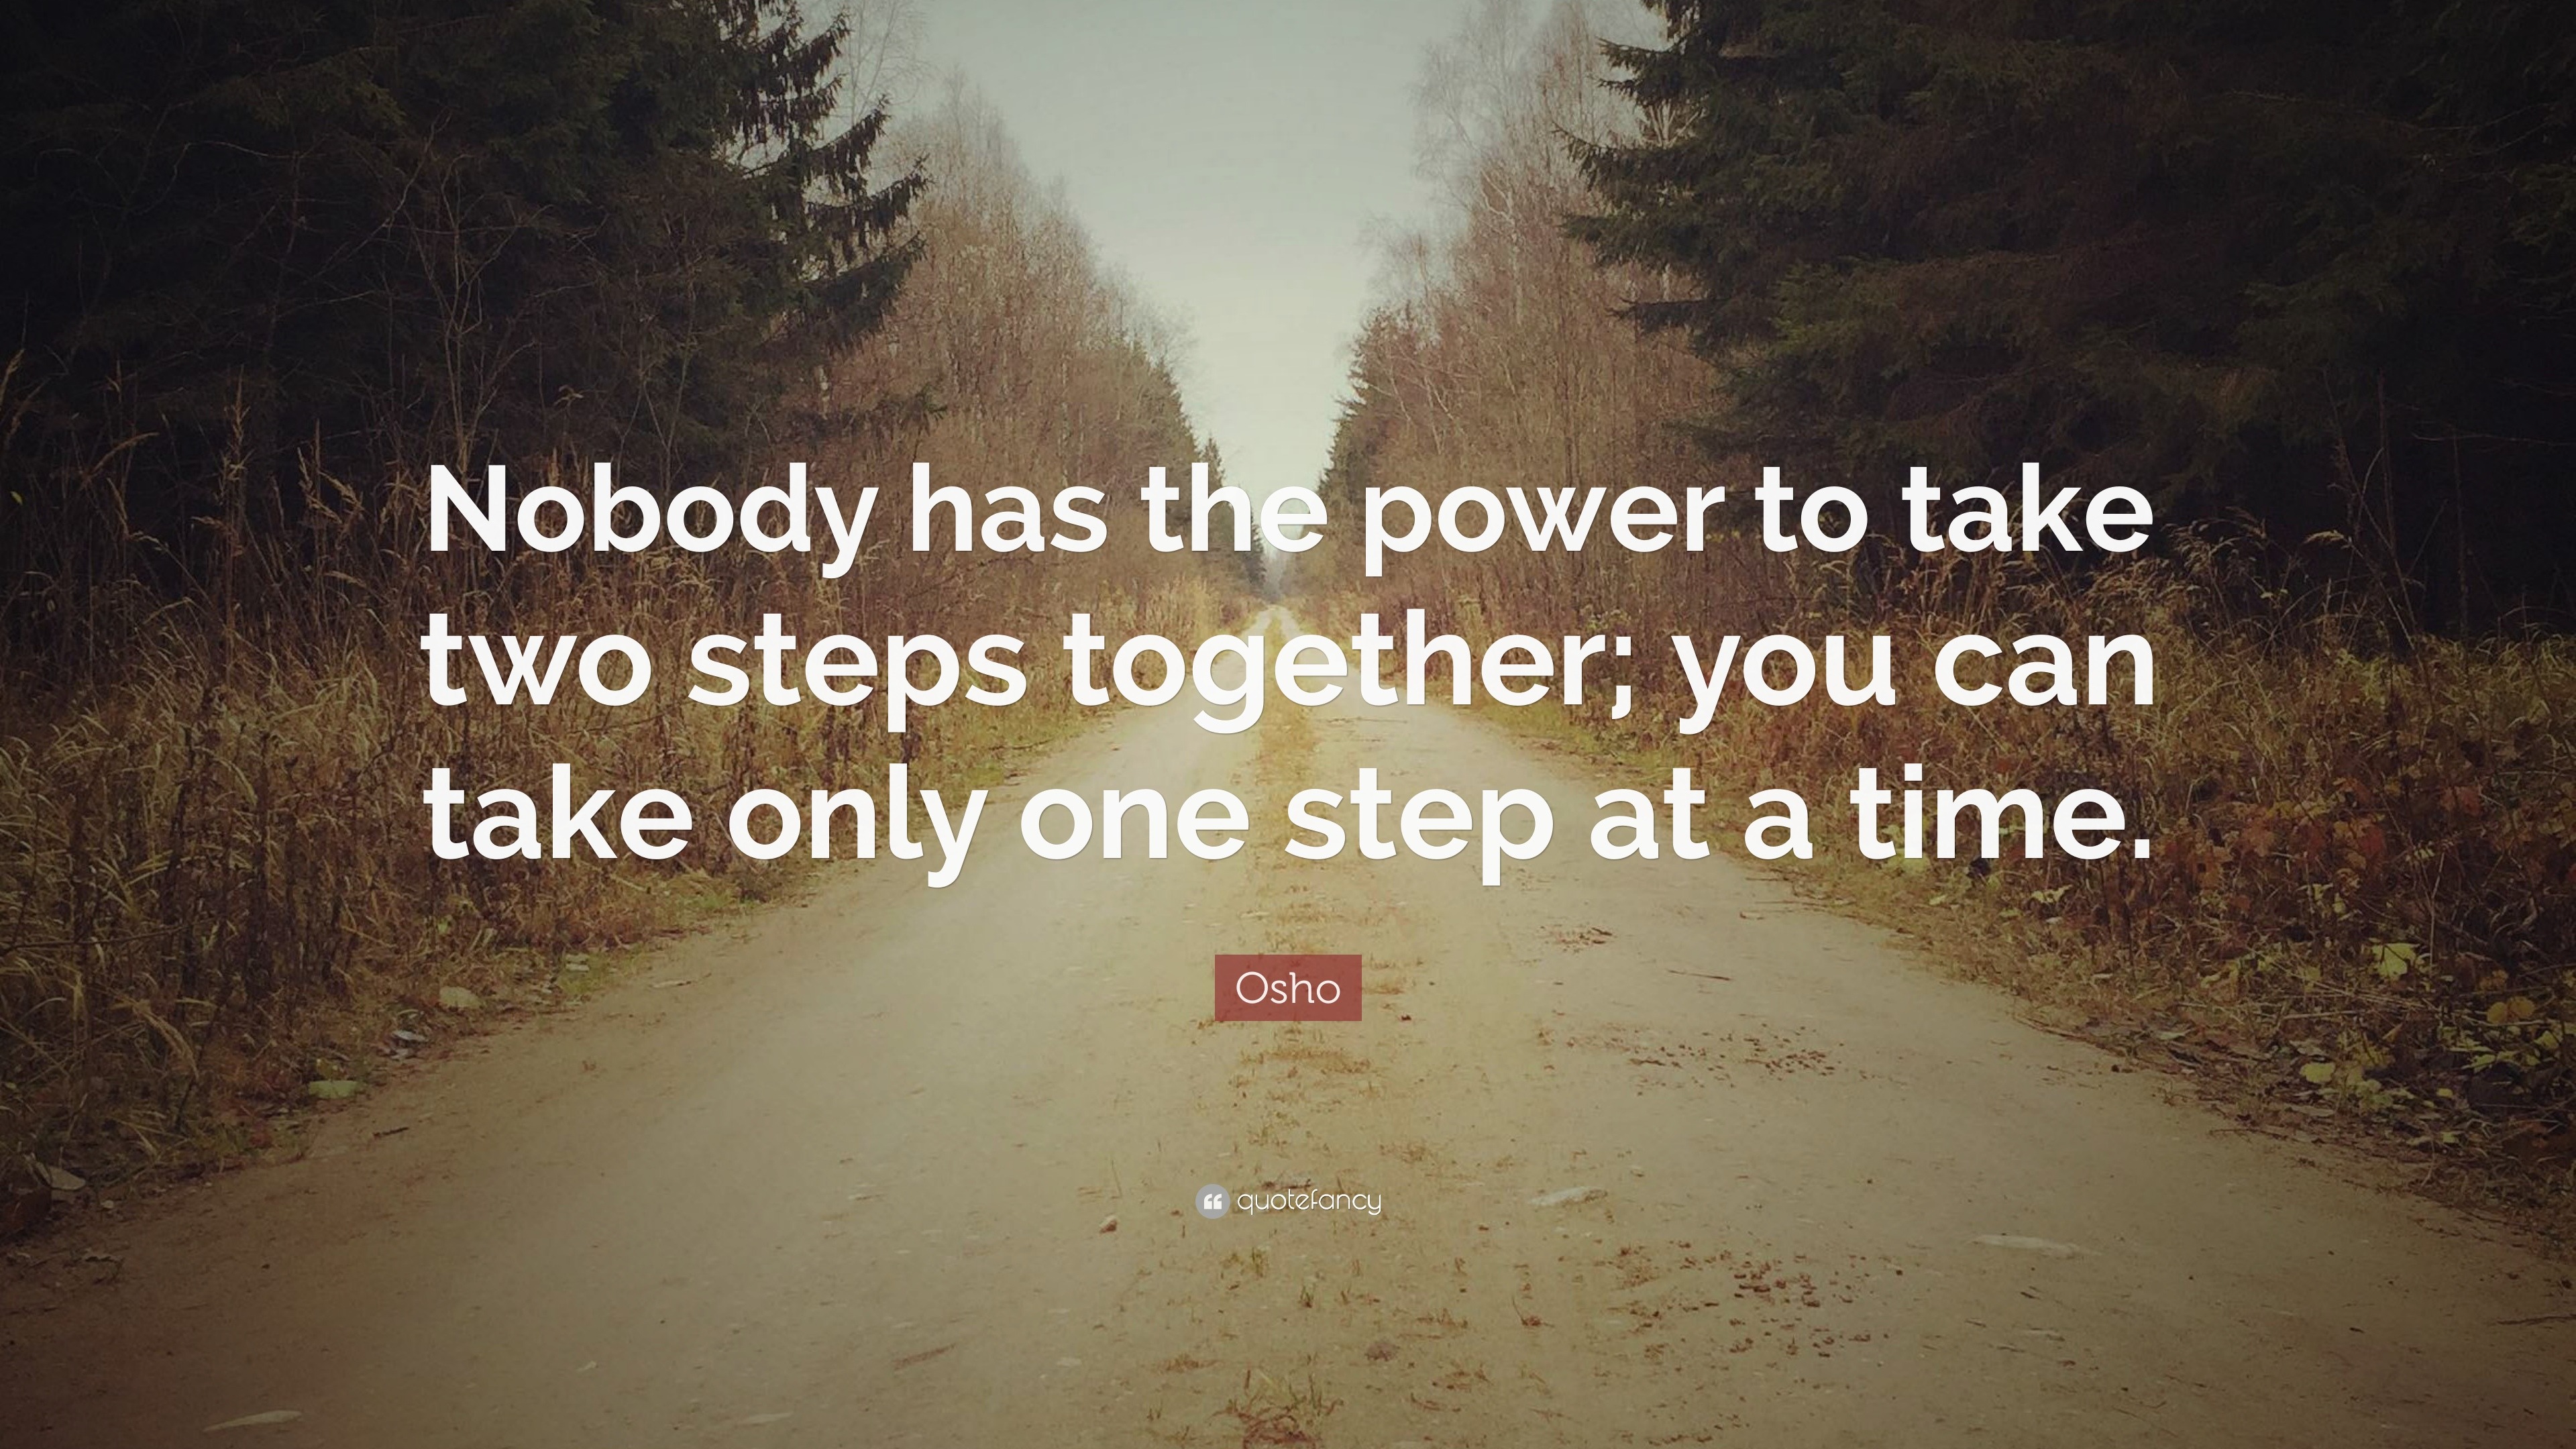 Osho Quotes (41 wallpapers) - Quotefancy